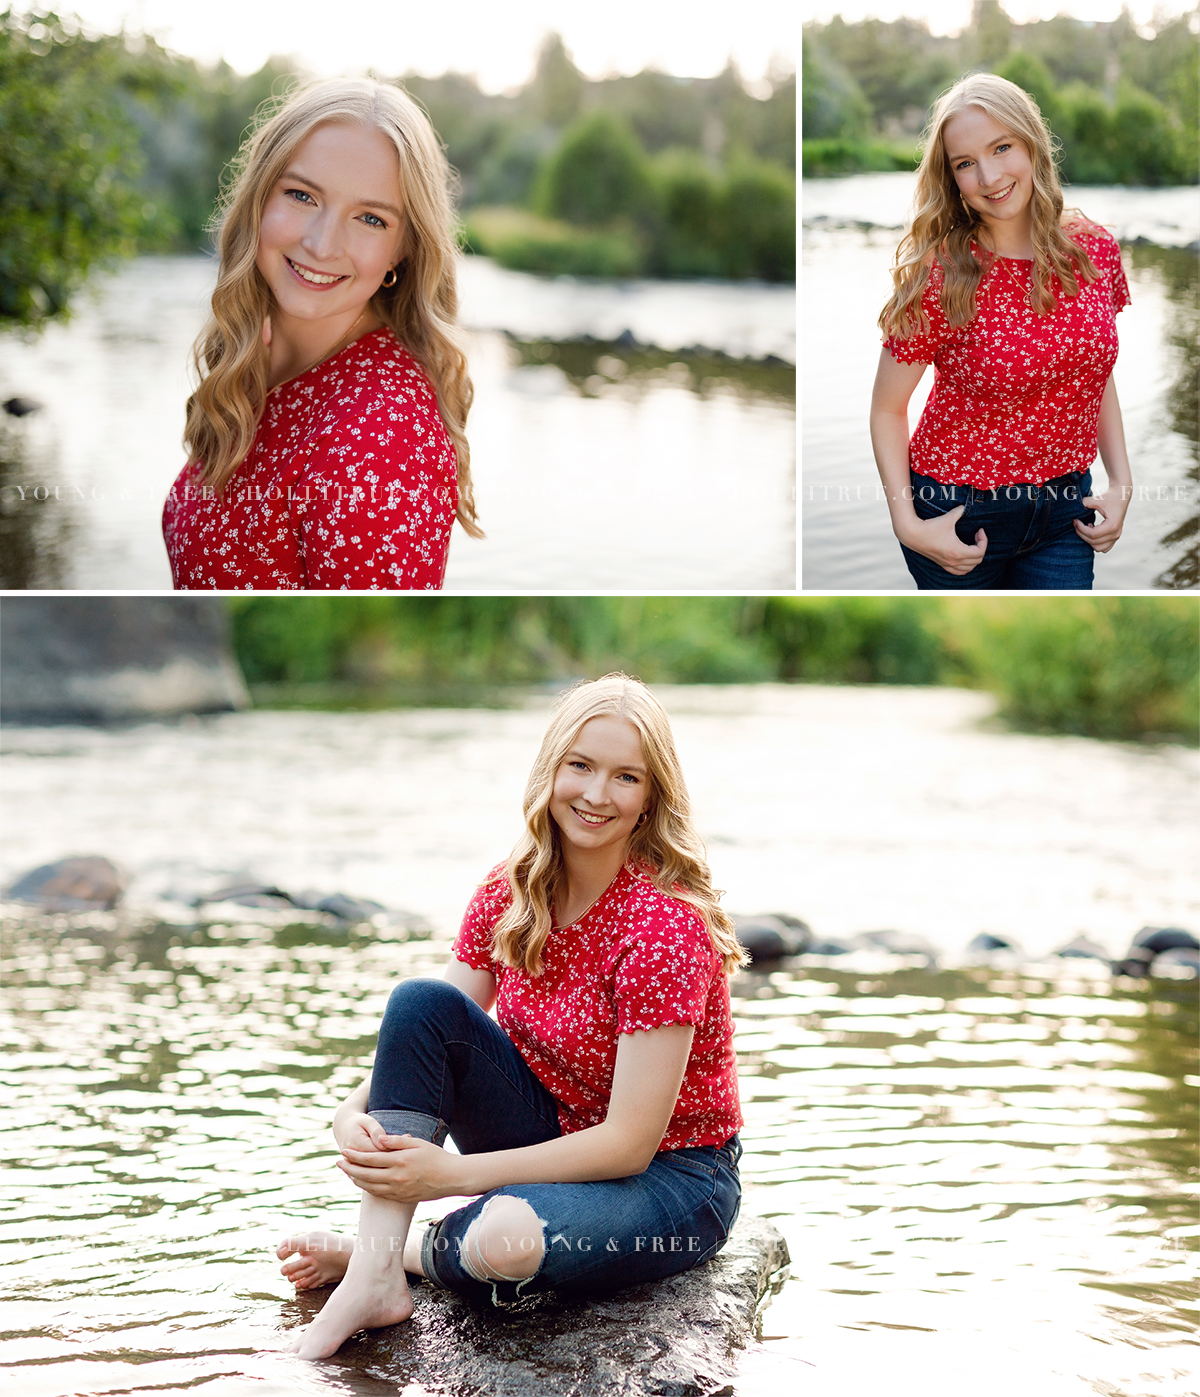 Lake Senior pictures at sunset in Bend, Oregon by Holli True Photography